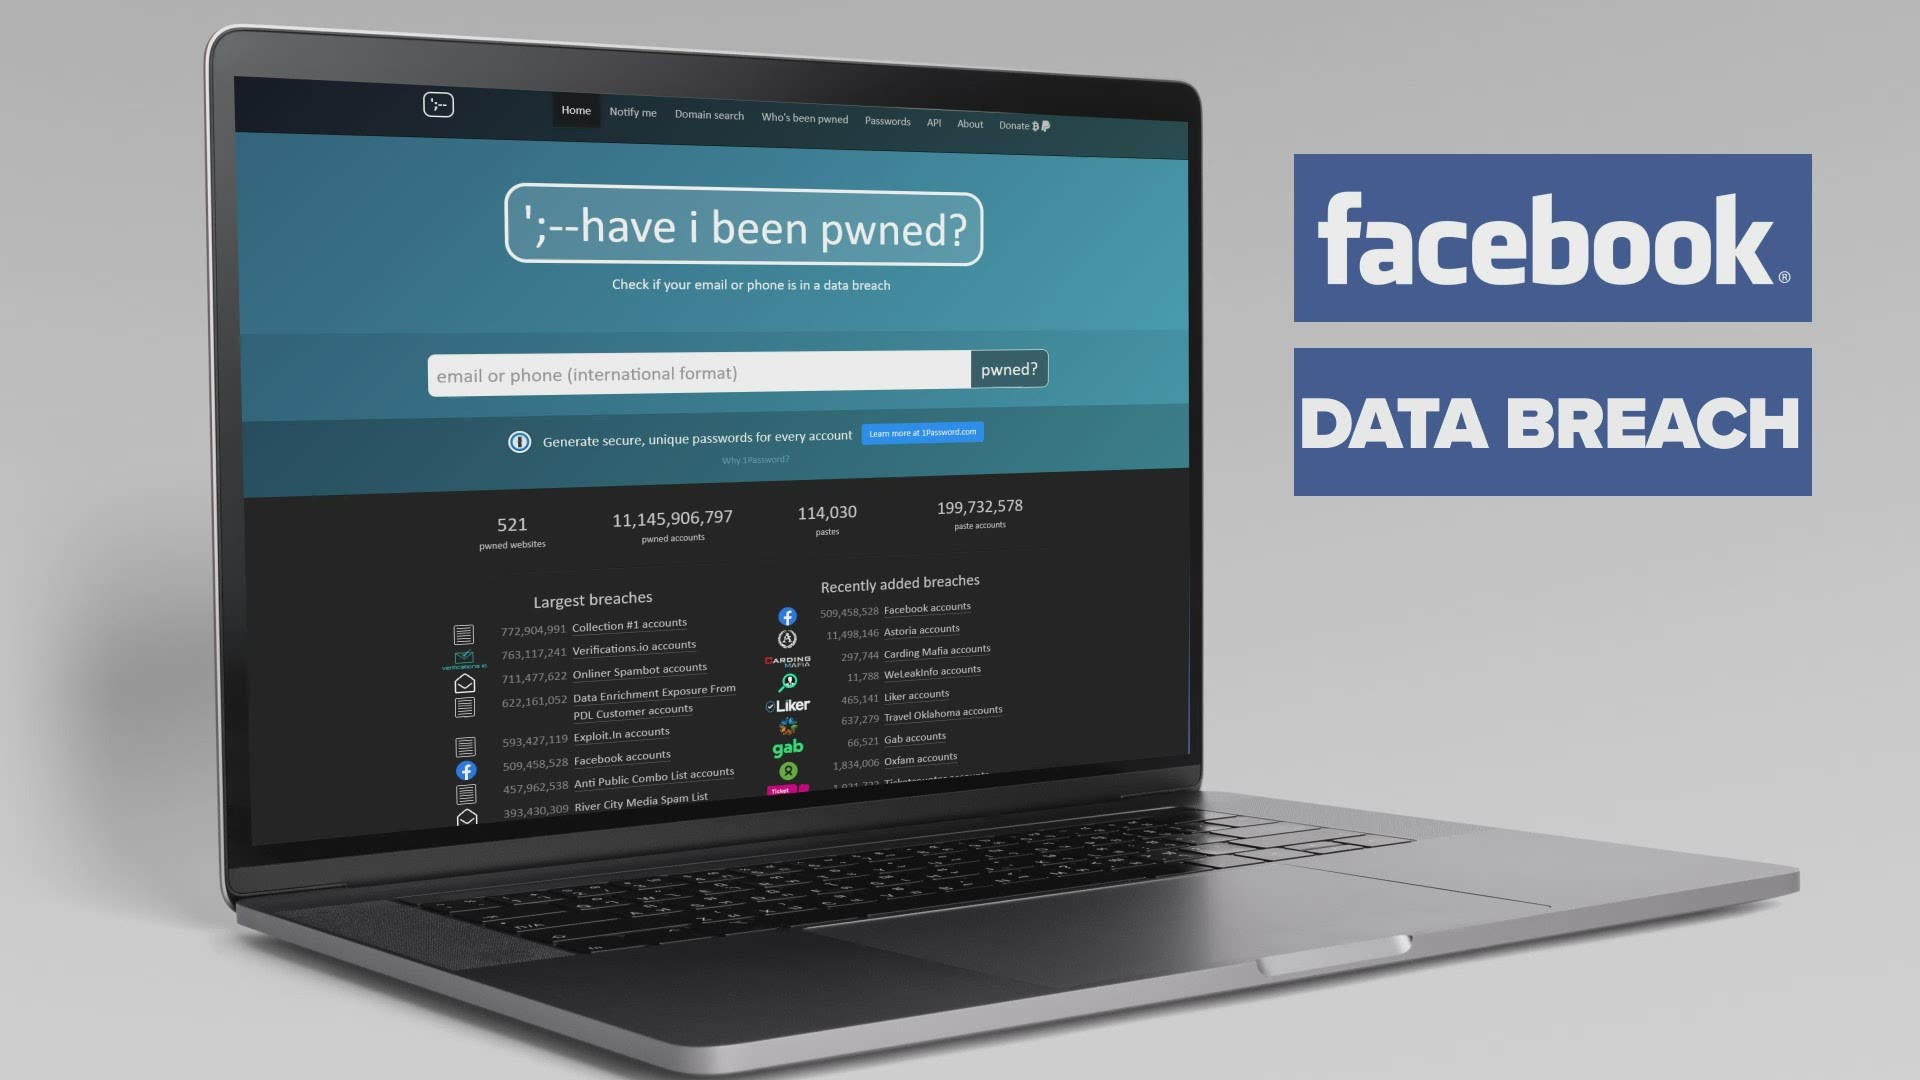 Stolen personal information was just leaked online after the massive 2019 Facebook data breach. We show you how to check and see if you were exposed.